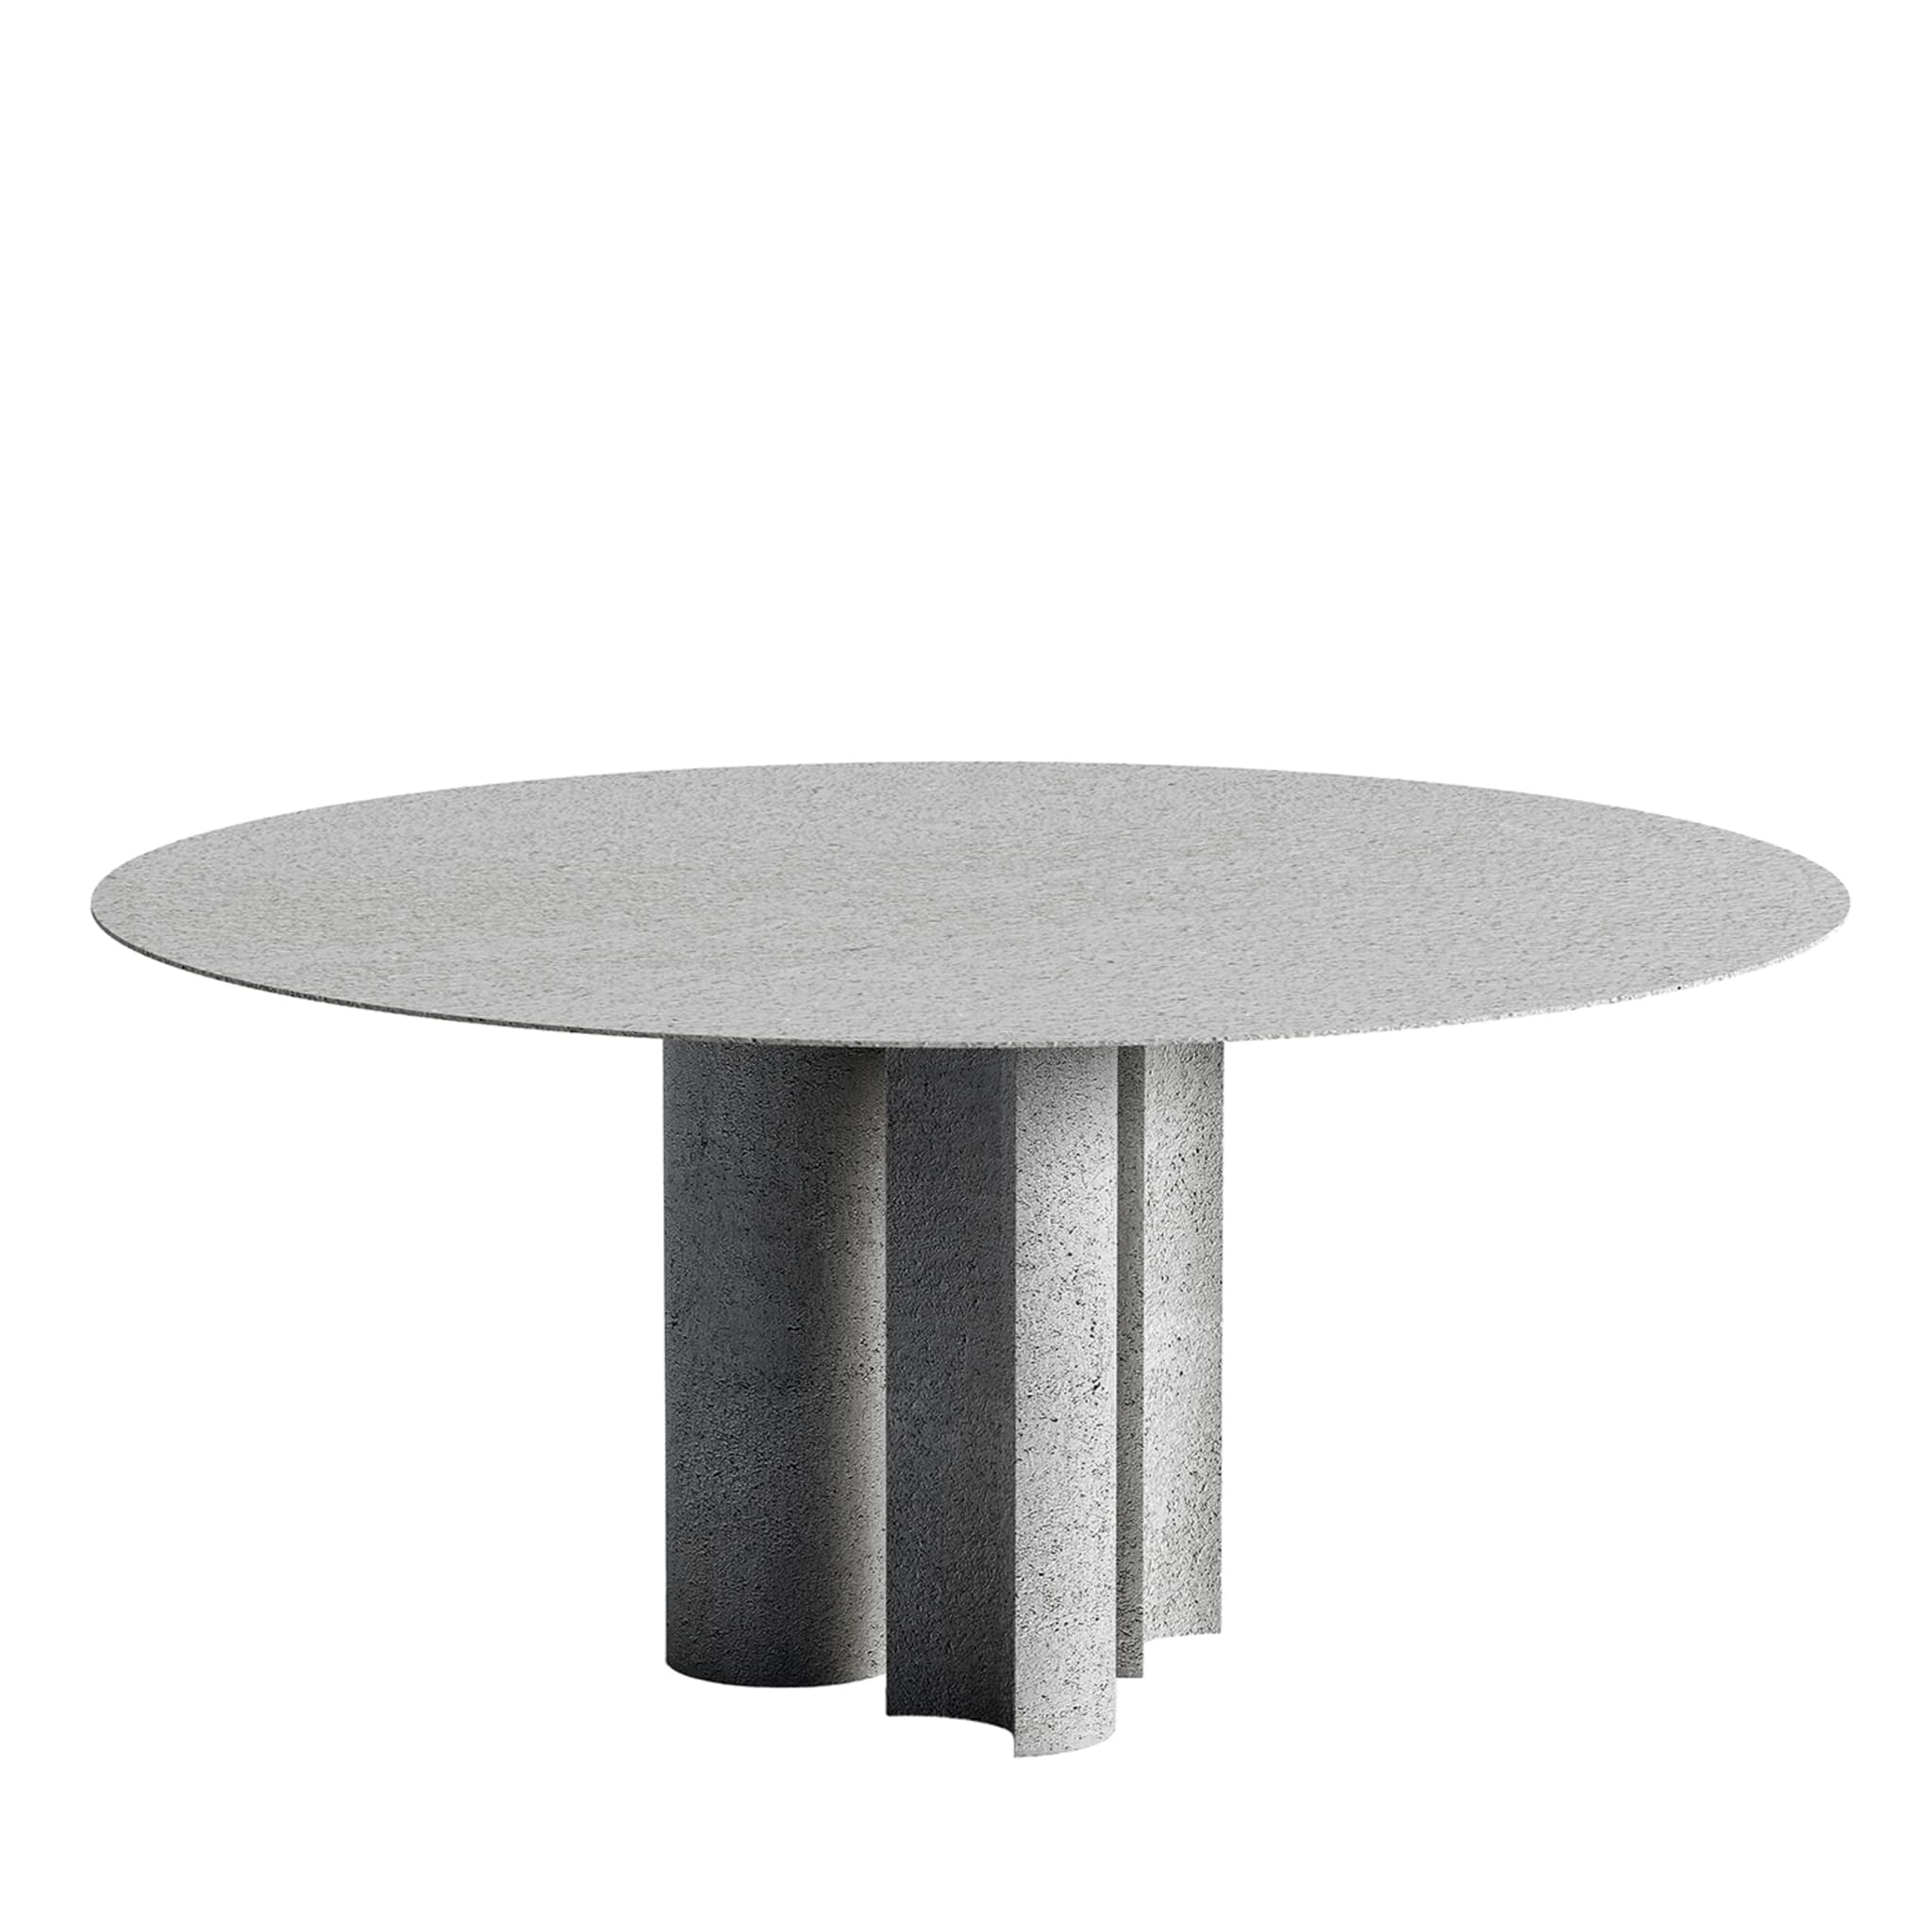 Moon Phase Gray Round Outdoor Table By Filippo Dell'Orto - Main view